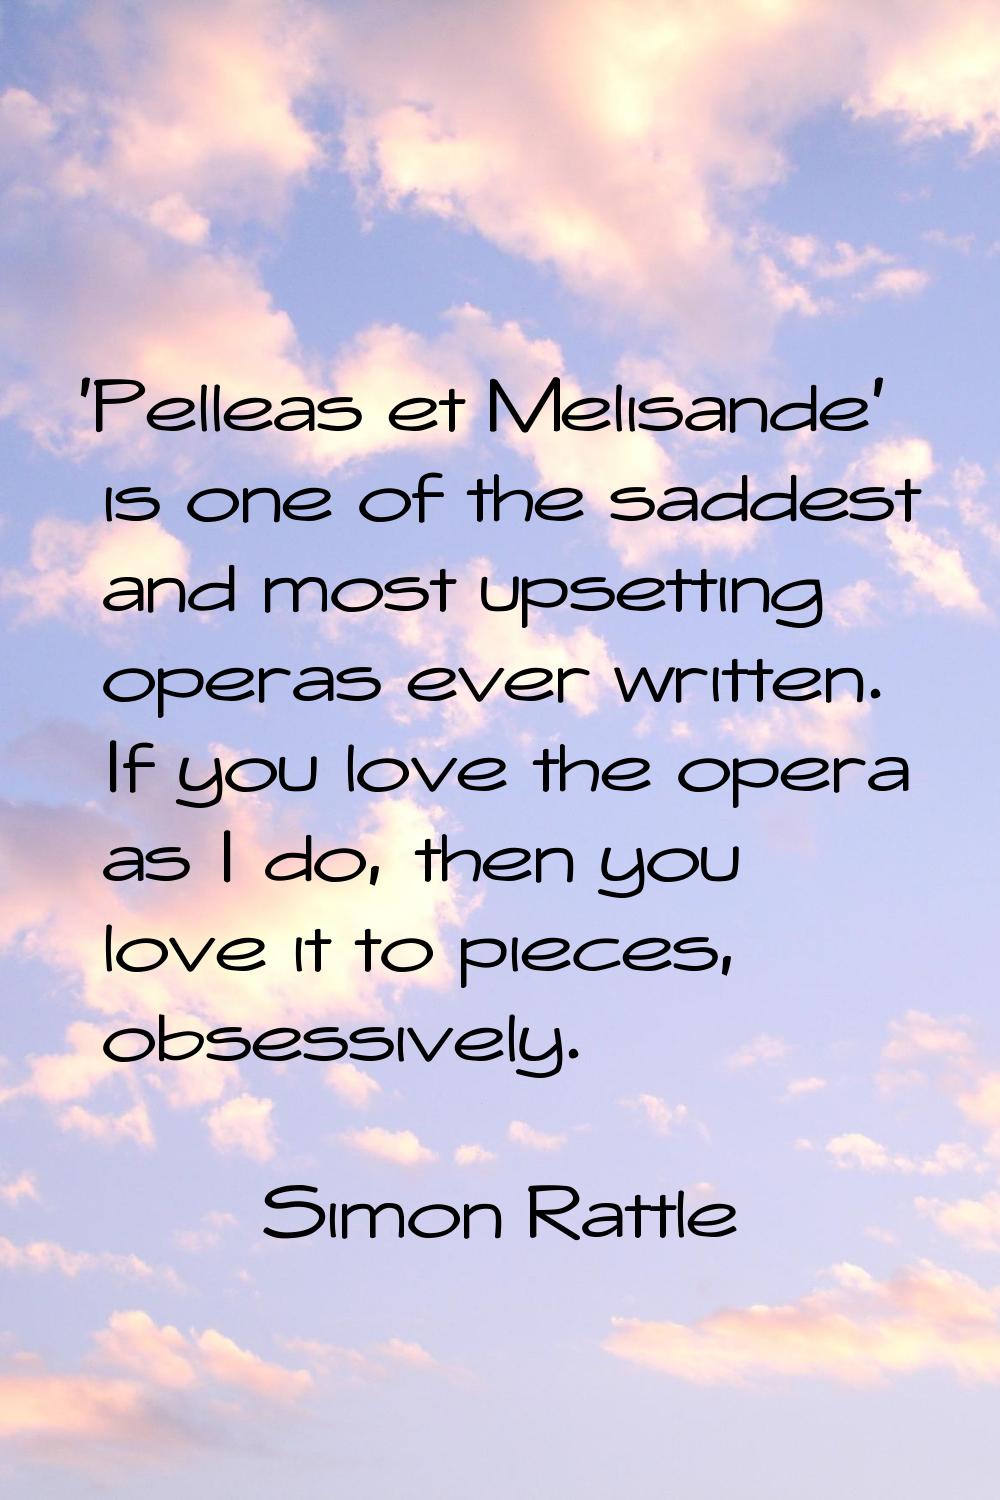 'Pelleas et Melisande' is one of the saddest and most upsetting operas ever written. If you love th